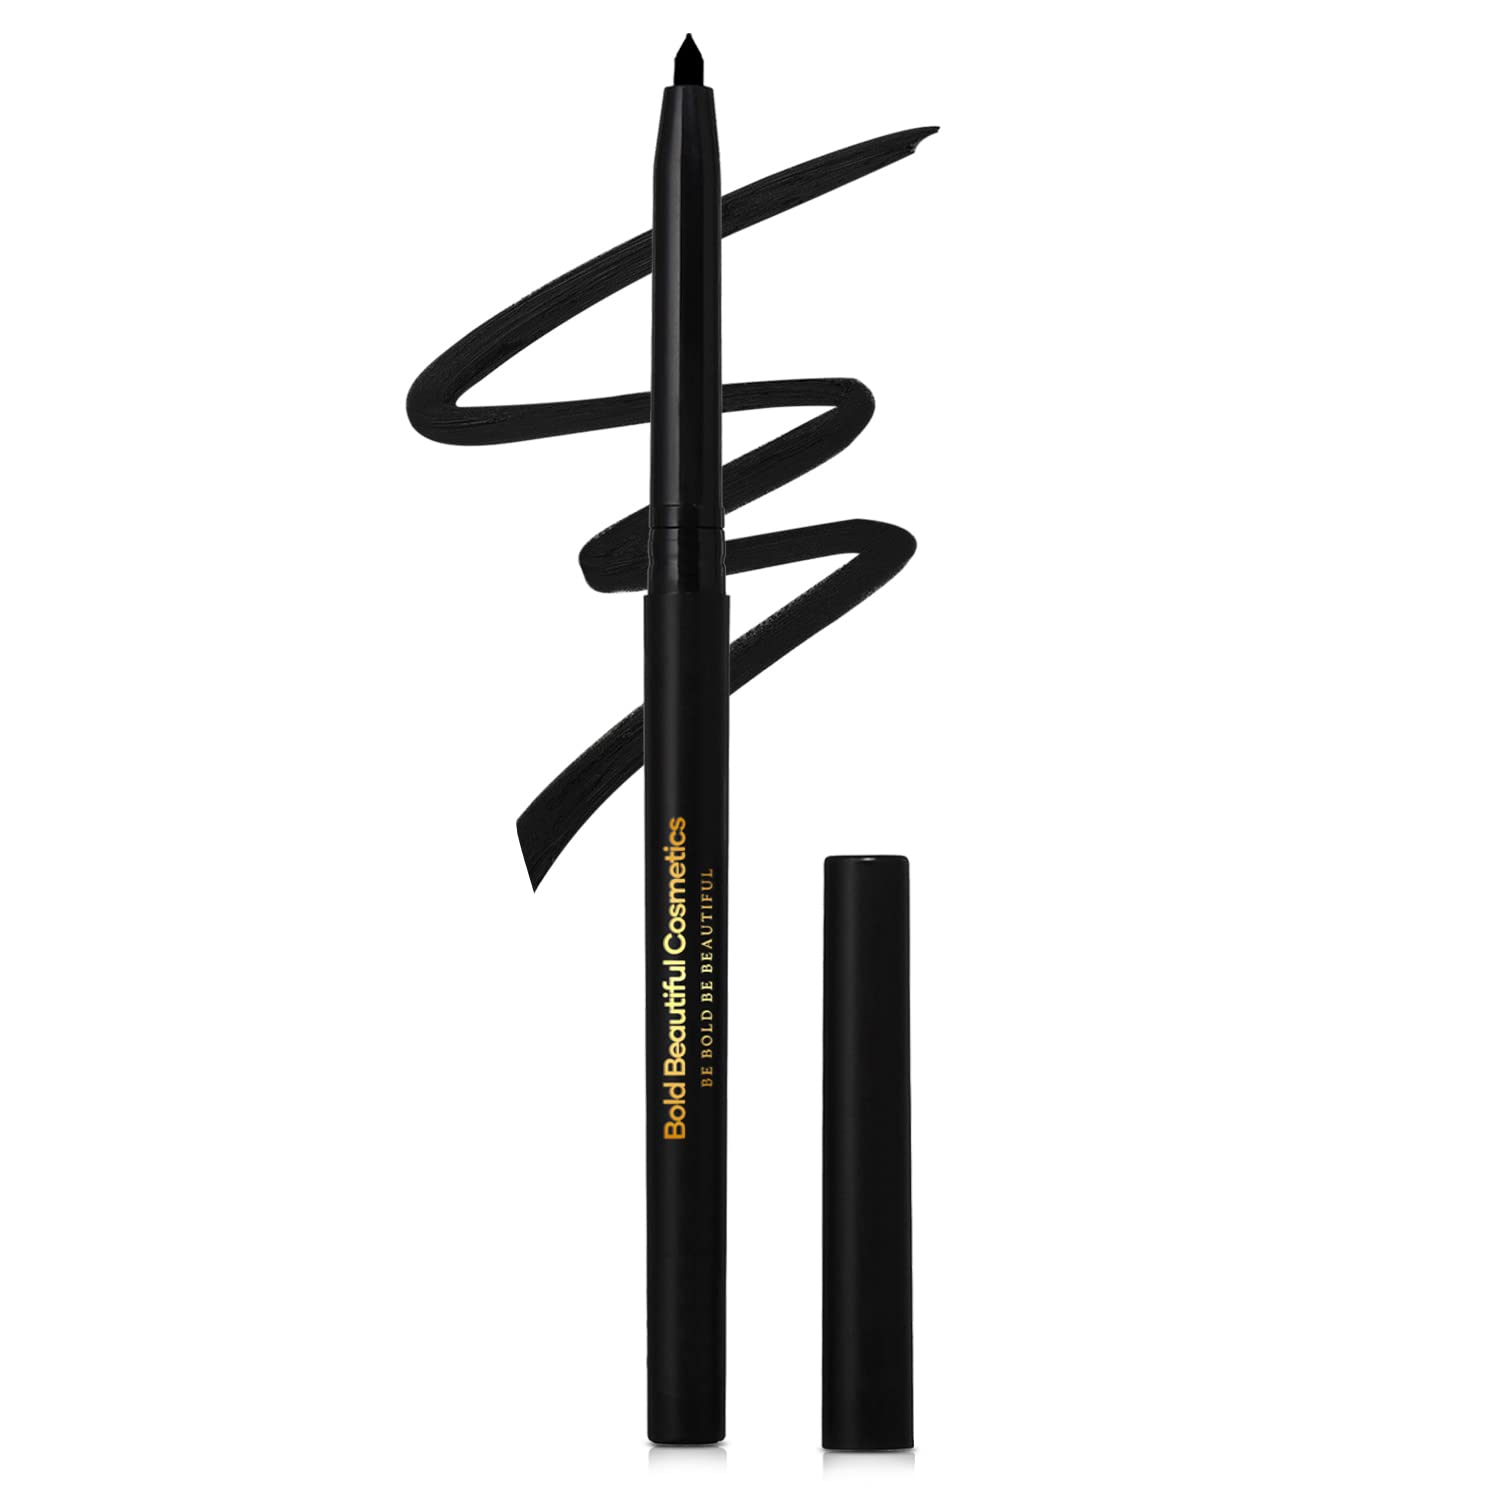 Mechanical Eyeliner Pencil by Bold Beautiful Cosmetics Smudge-Proof and Waterproof, Black